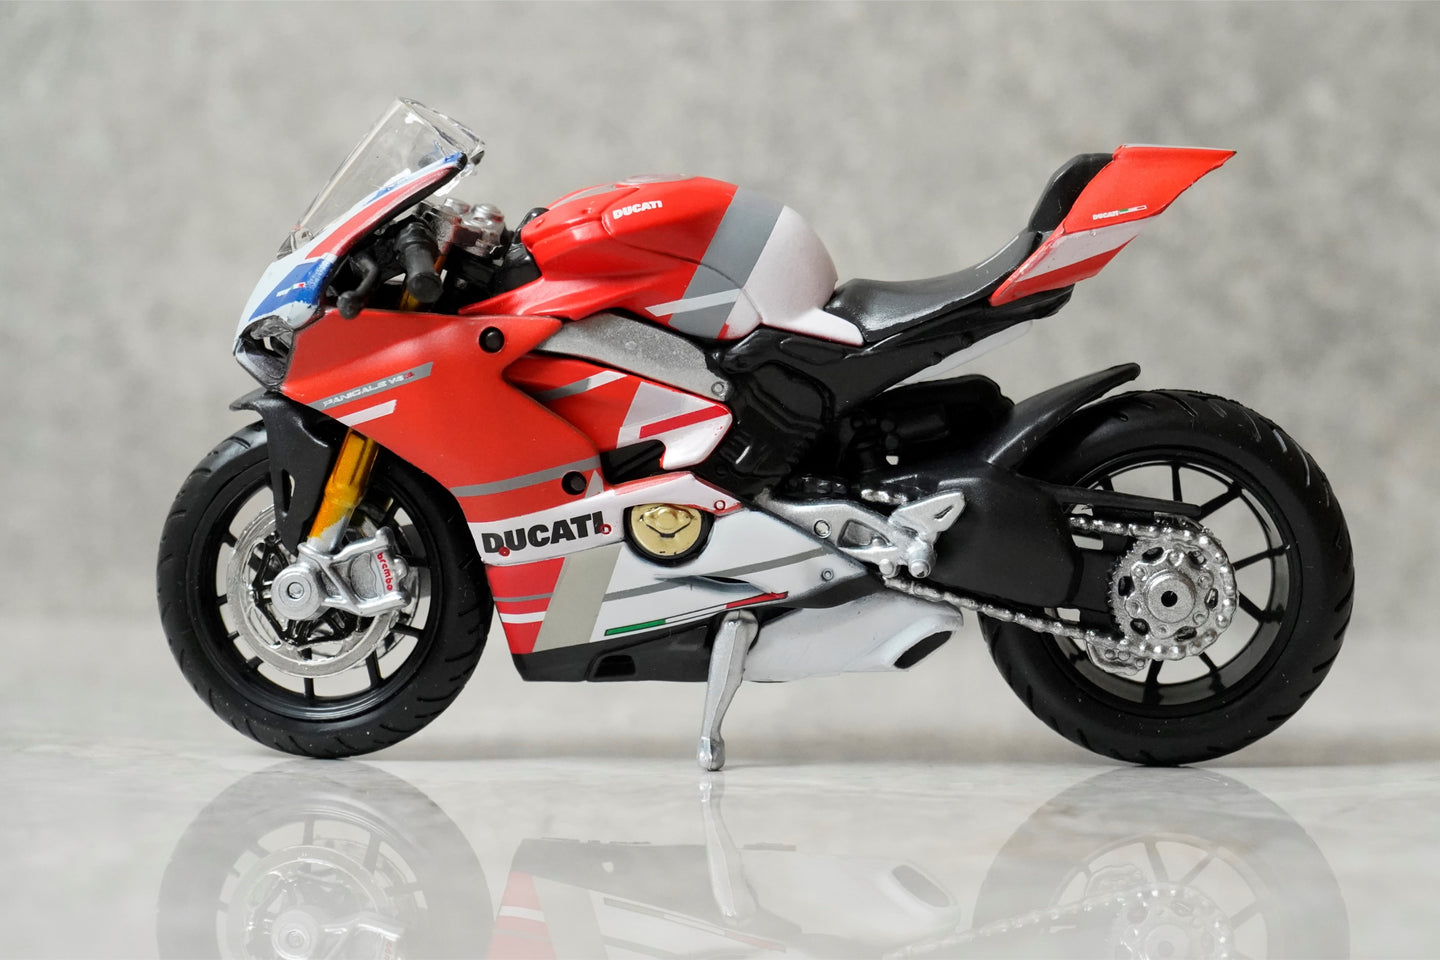 Ducati Panigale V4 S Corse Diecast Bike 1:18 Motorcycle Model By Maisto